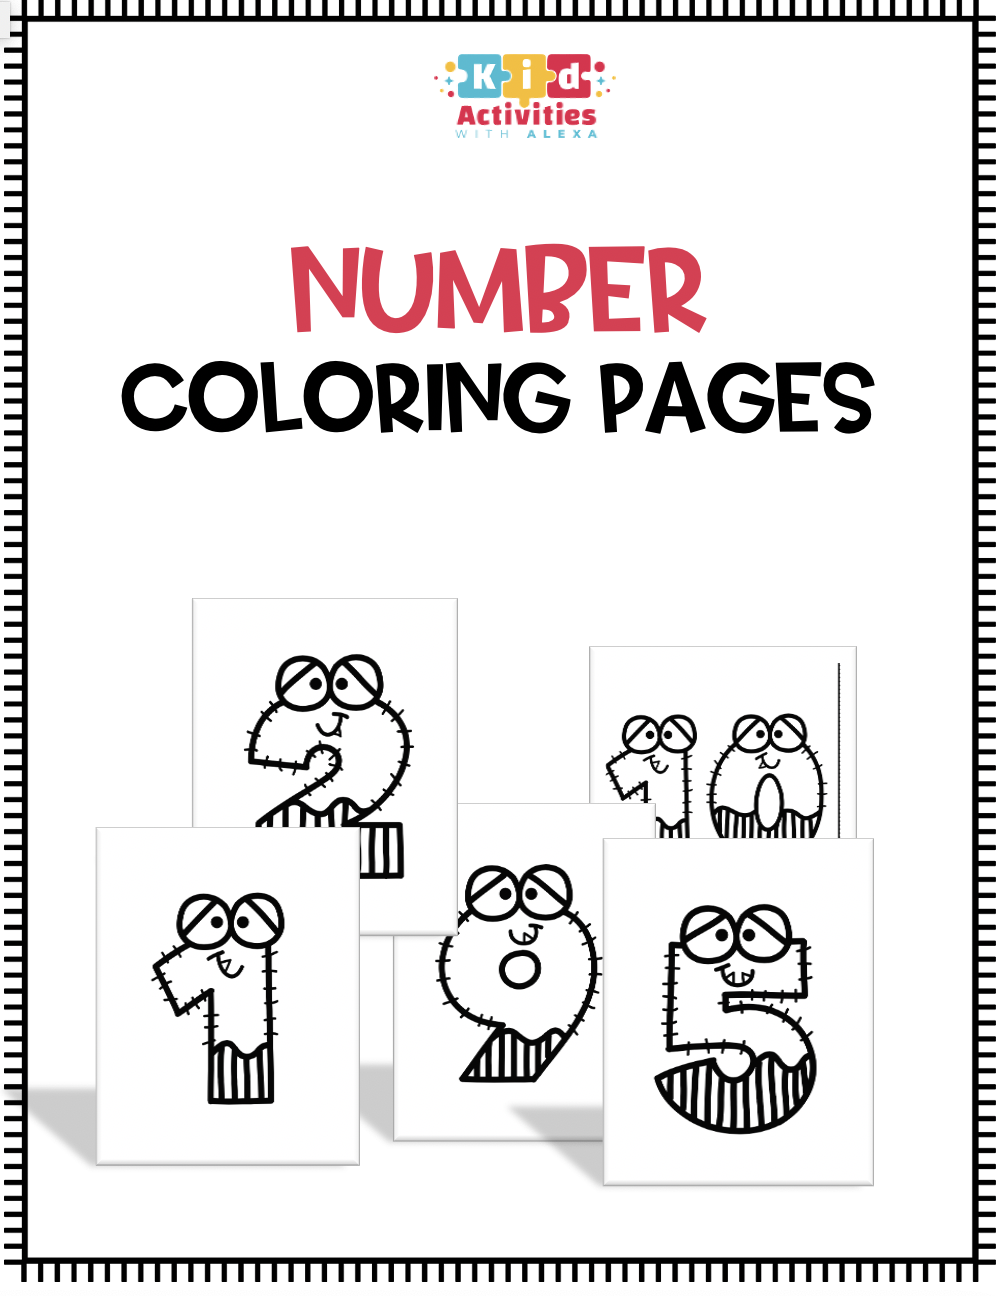 Learn Numbers with Coloring Pages - Kid Activities with Alexa